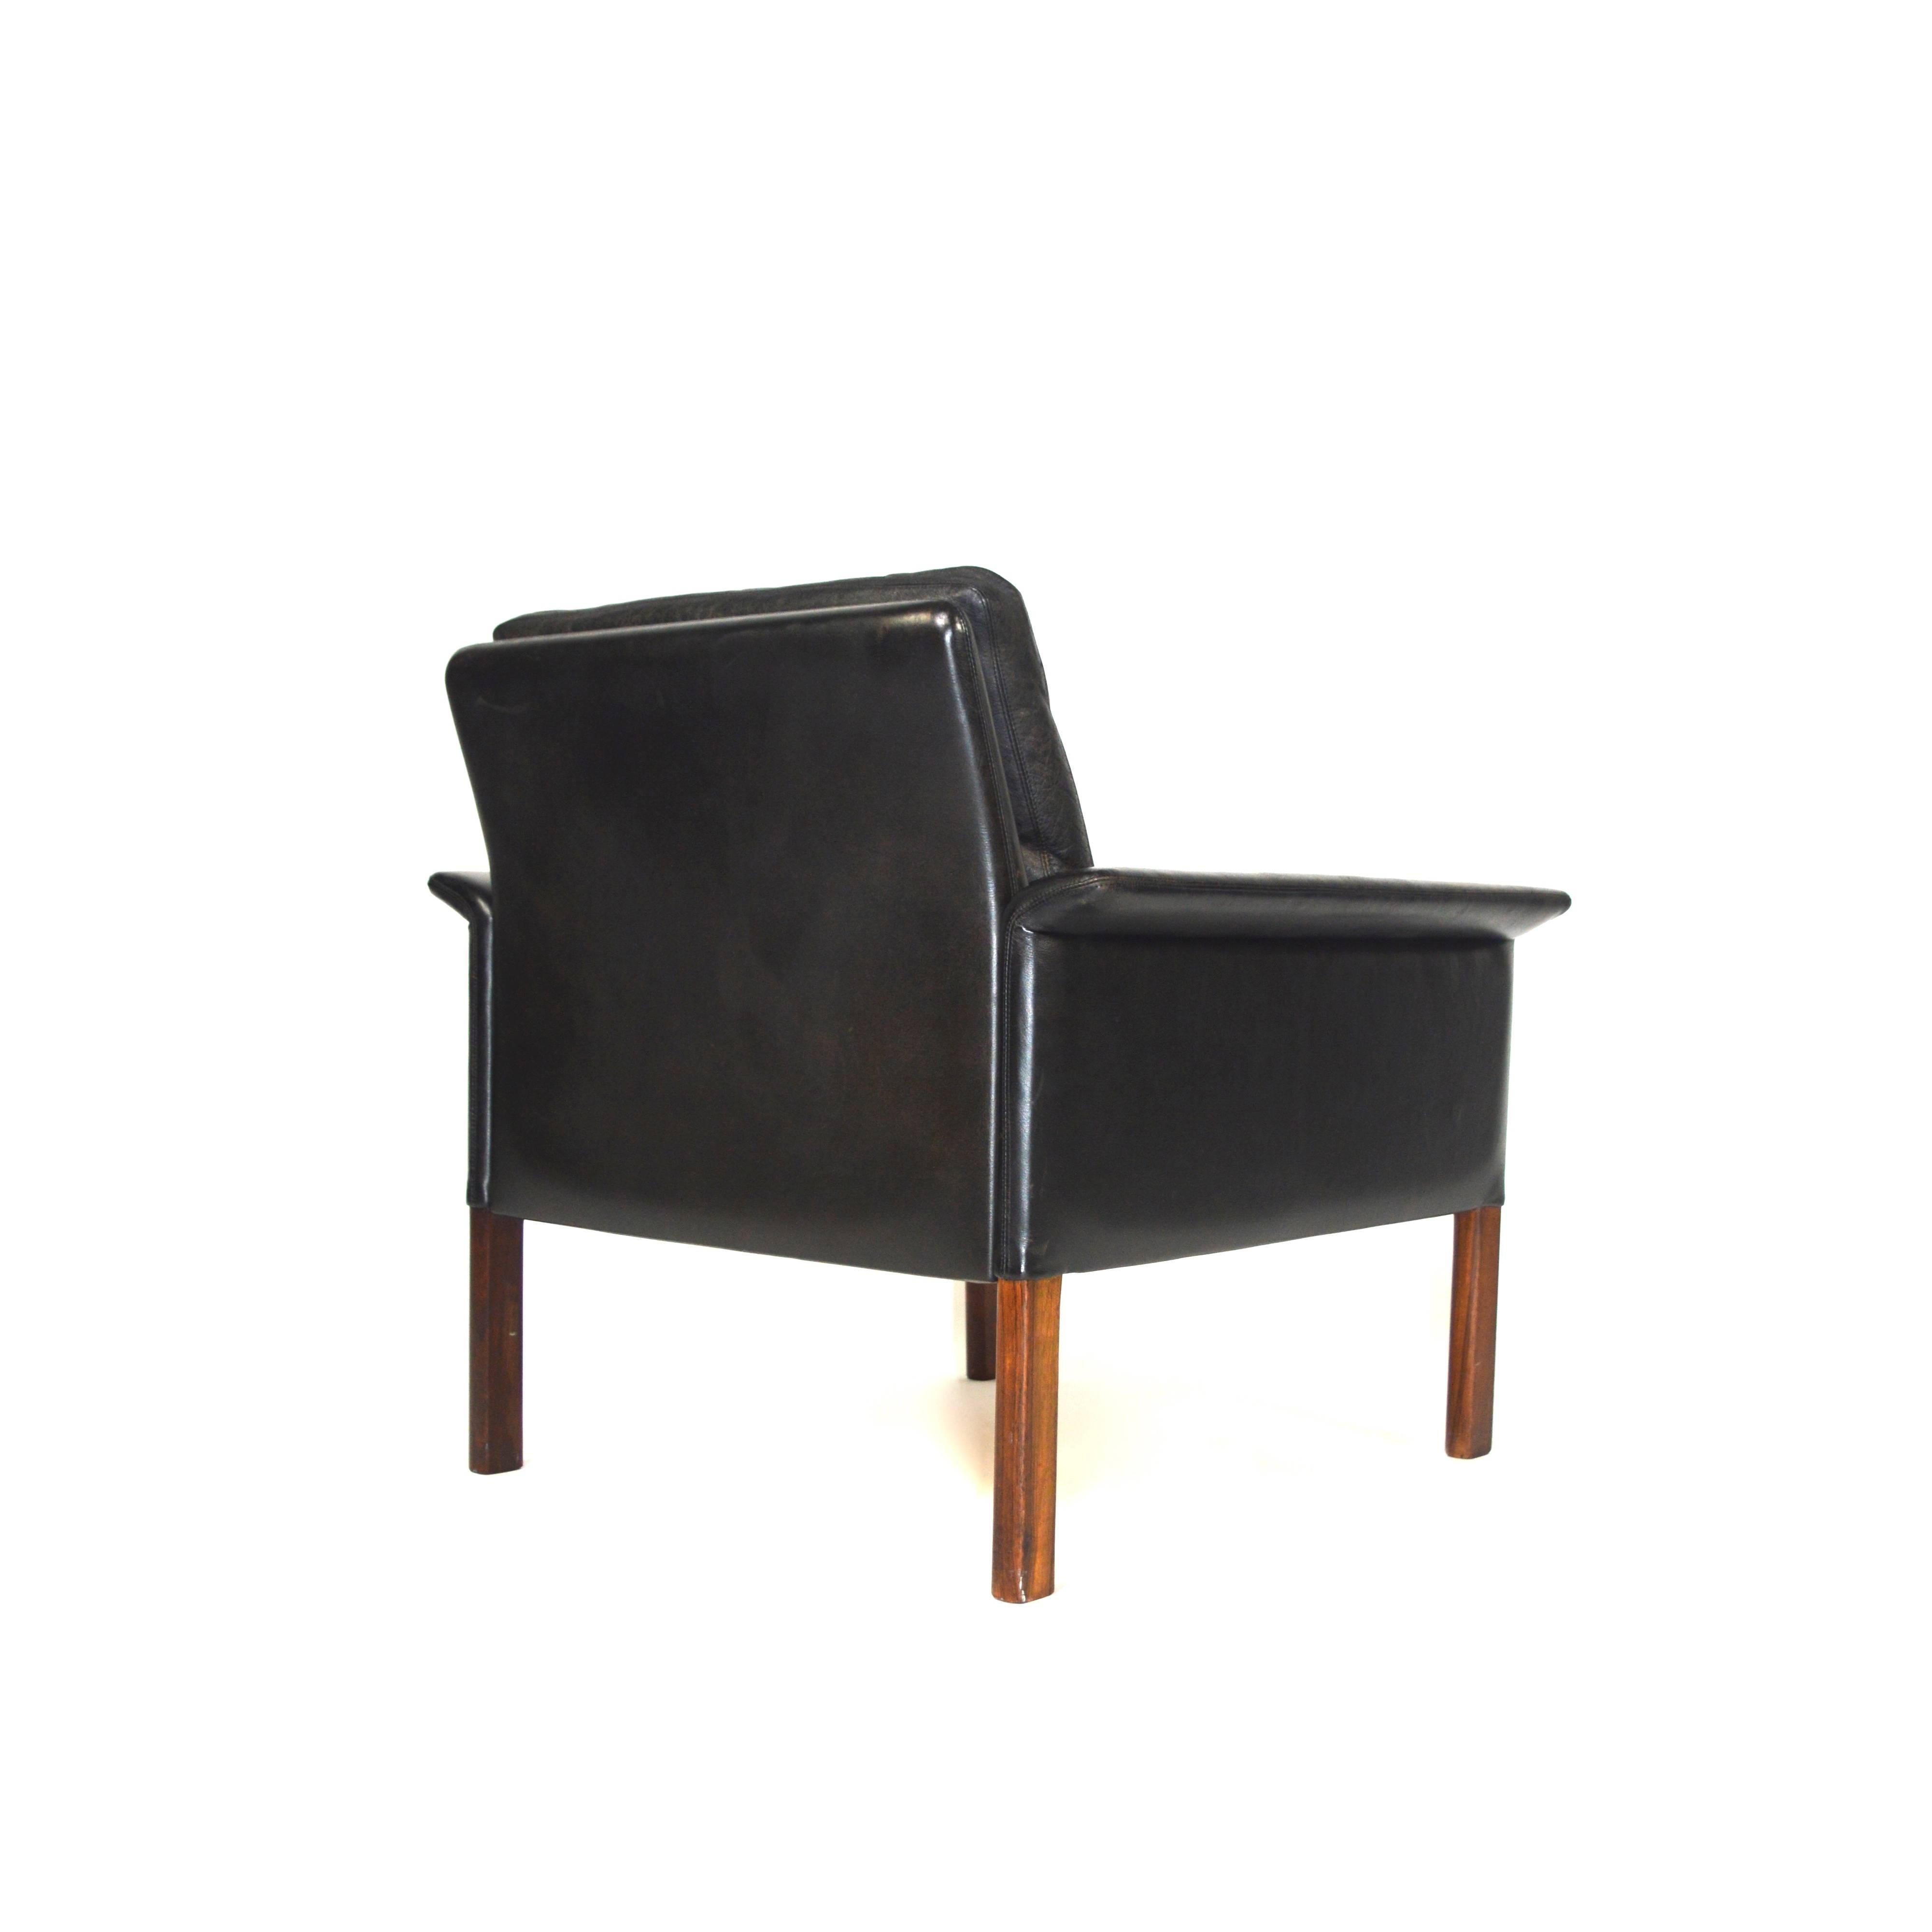 Beautiful easy chair designed by Hans Olsen for CS Møbelfabrik in Denmark. This chair was designed in 1963 and is made of black leather with solid Rosewood feet. 
This chair is in very good condition with nice patinated leather. Minor age related